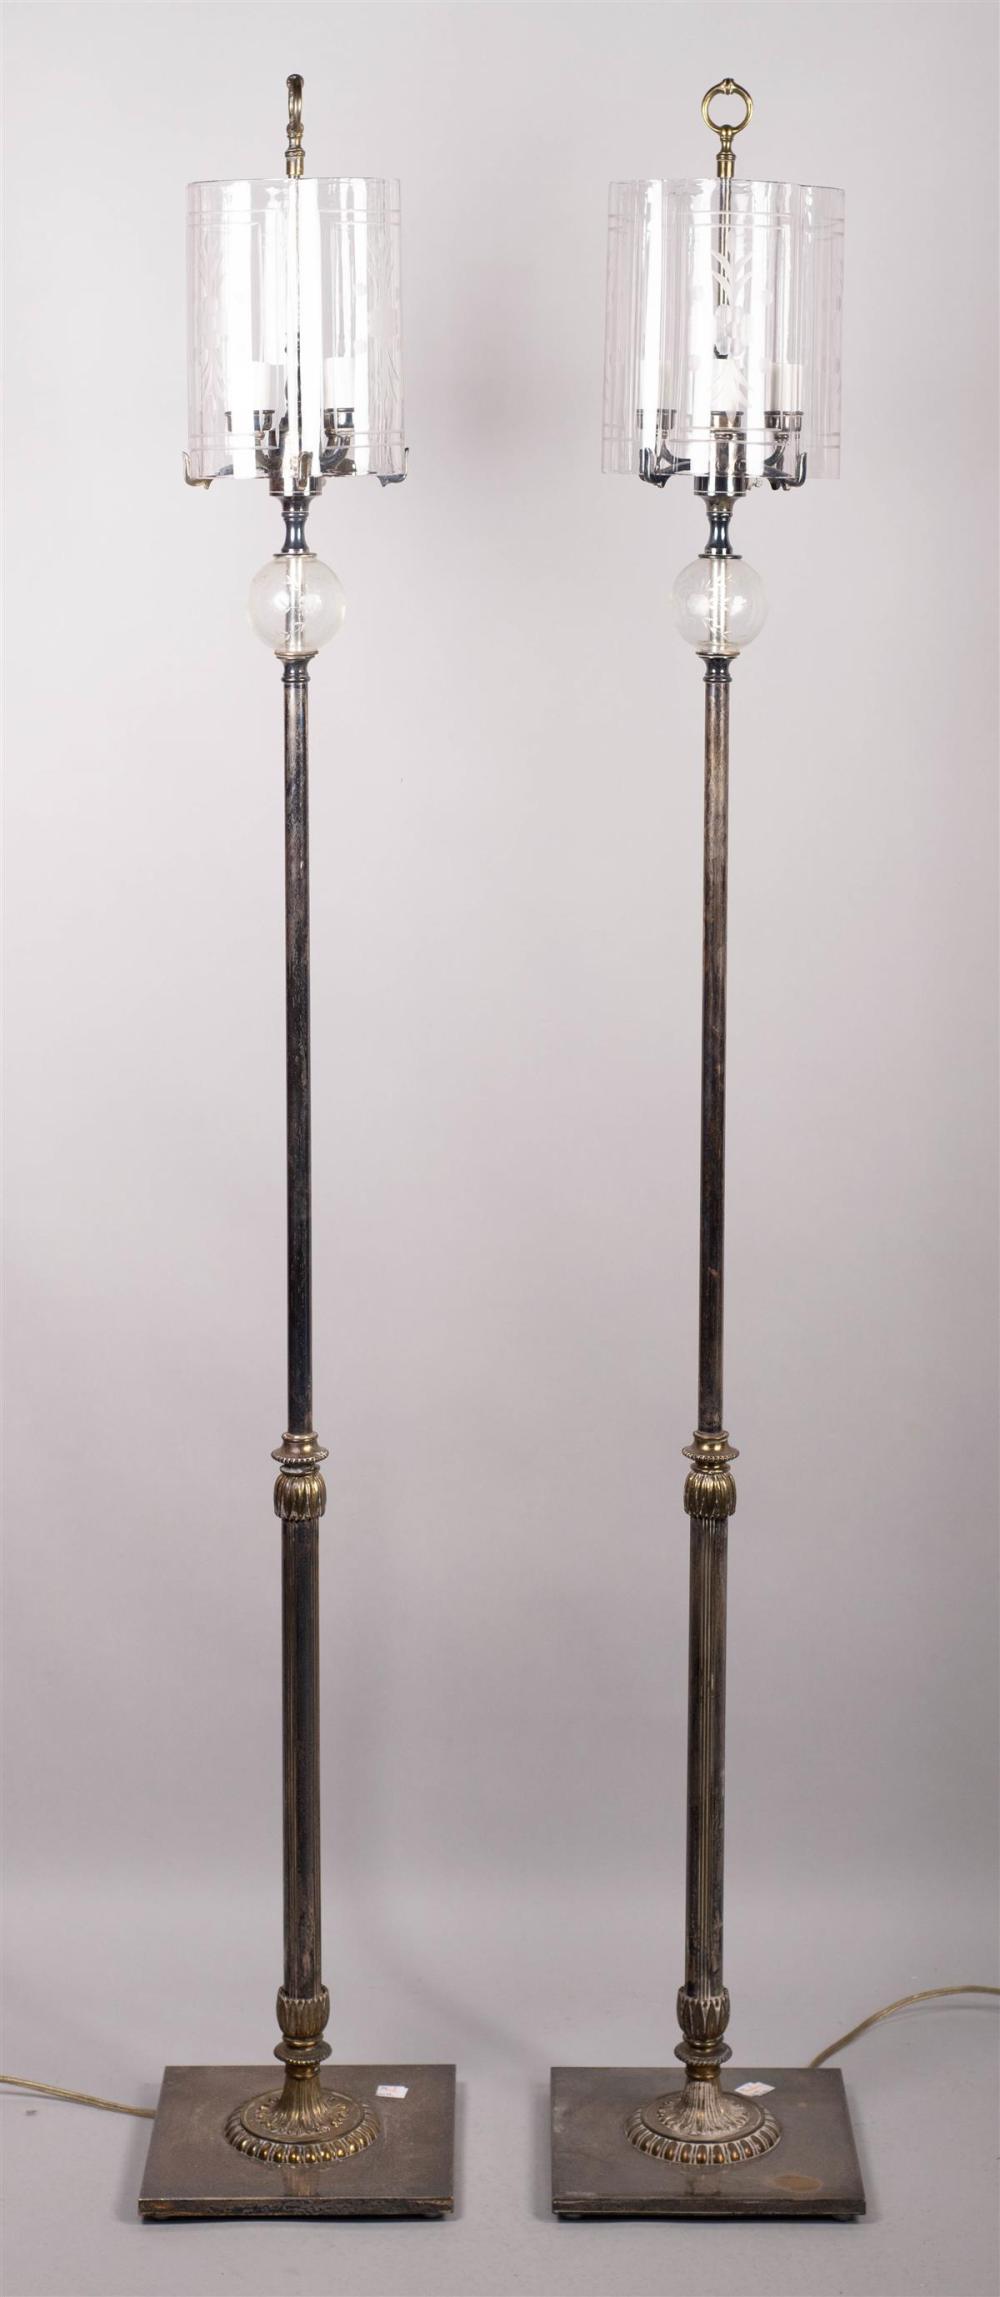 PAIR OF NEOCLASSICAL STYLE FOUR